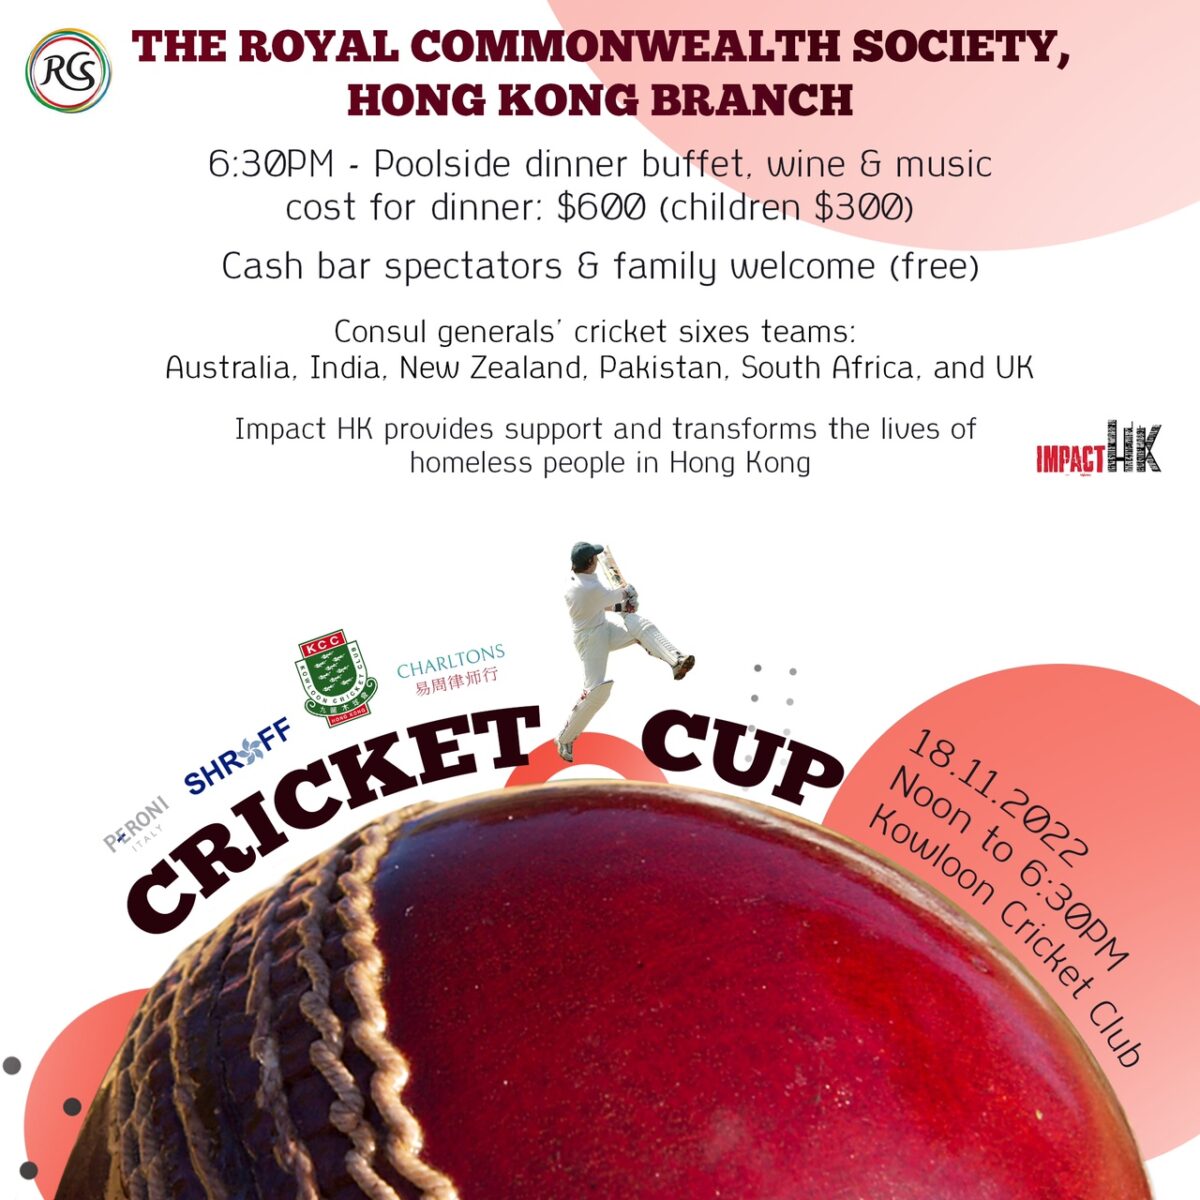 Charltons and The Royal Commonwealth Society Hong Kong branch invites you to the RCS Cricket Cup 2022